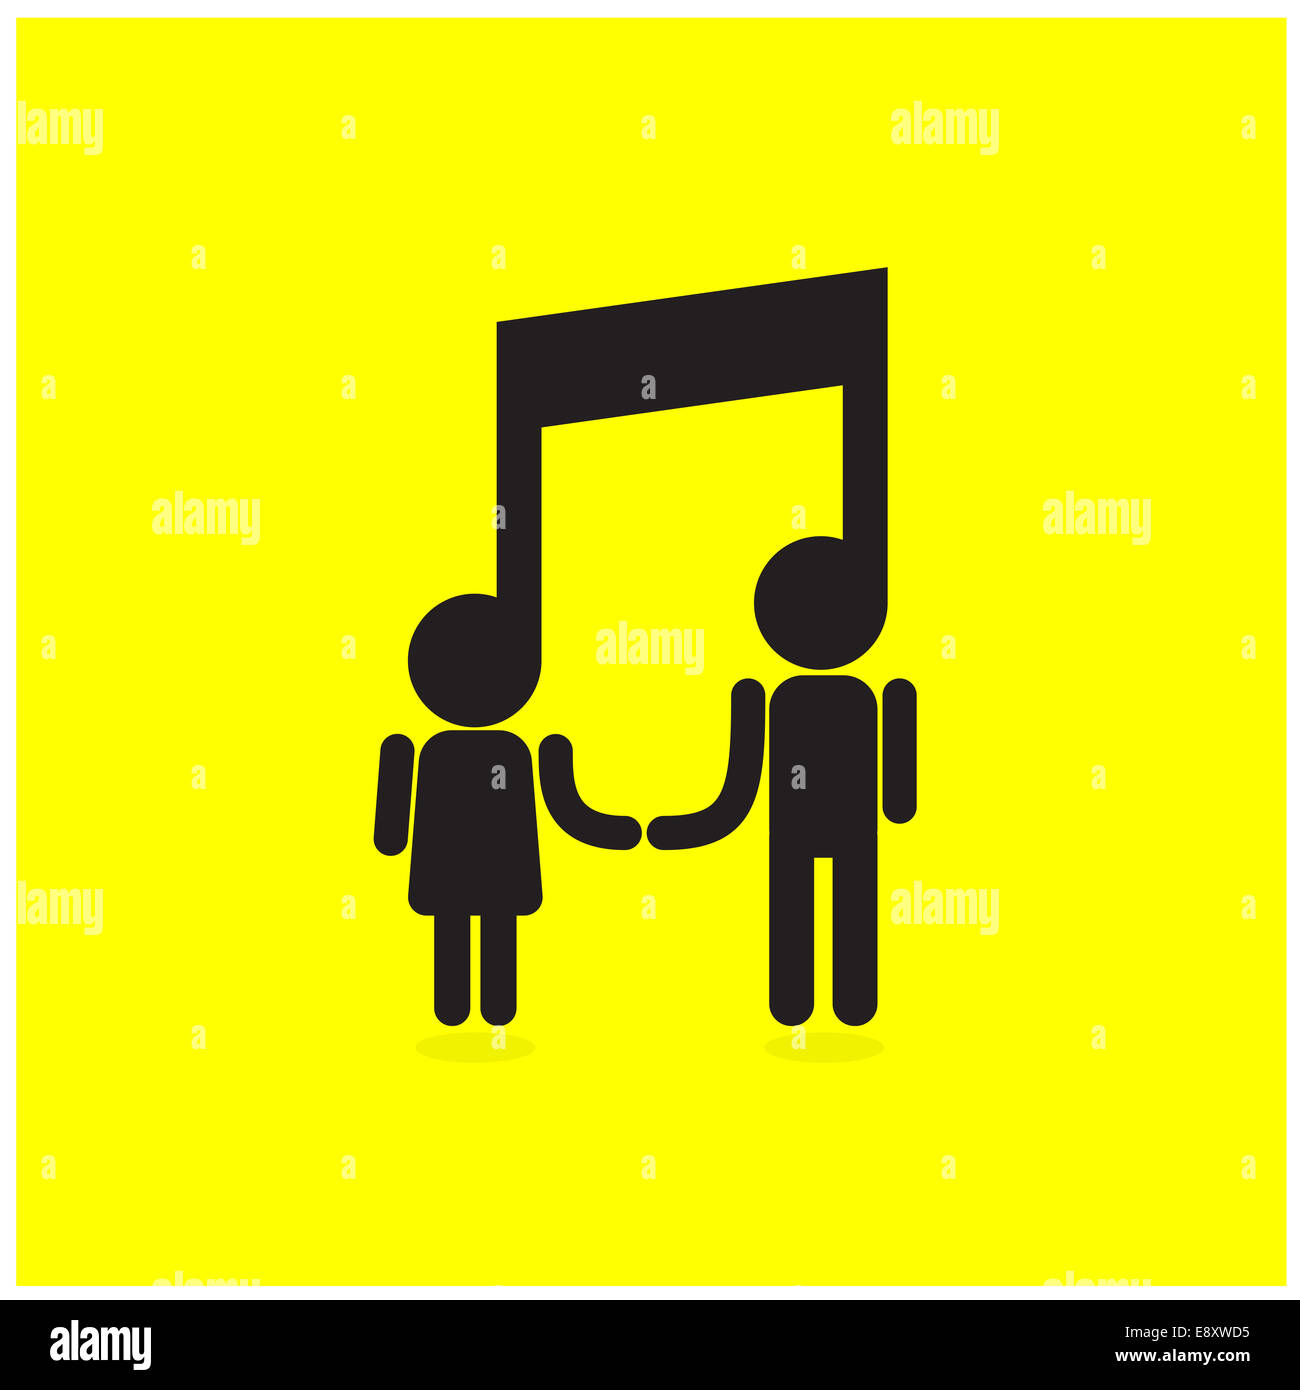 Creative music note sign icon and silhouette people symbol . Musical symbol. Stock Photo